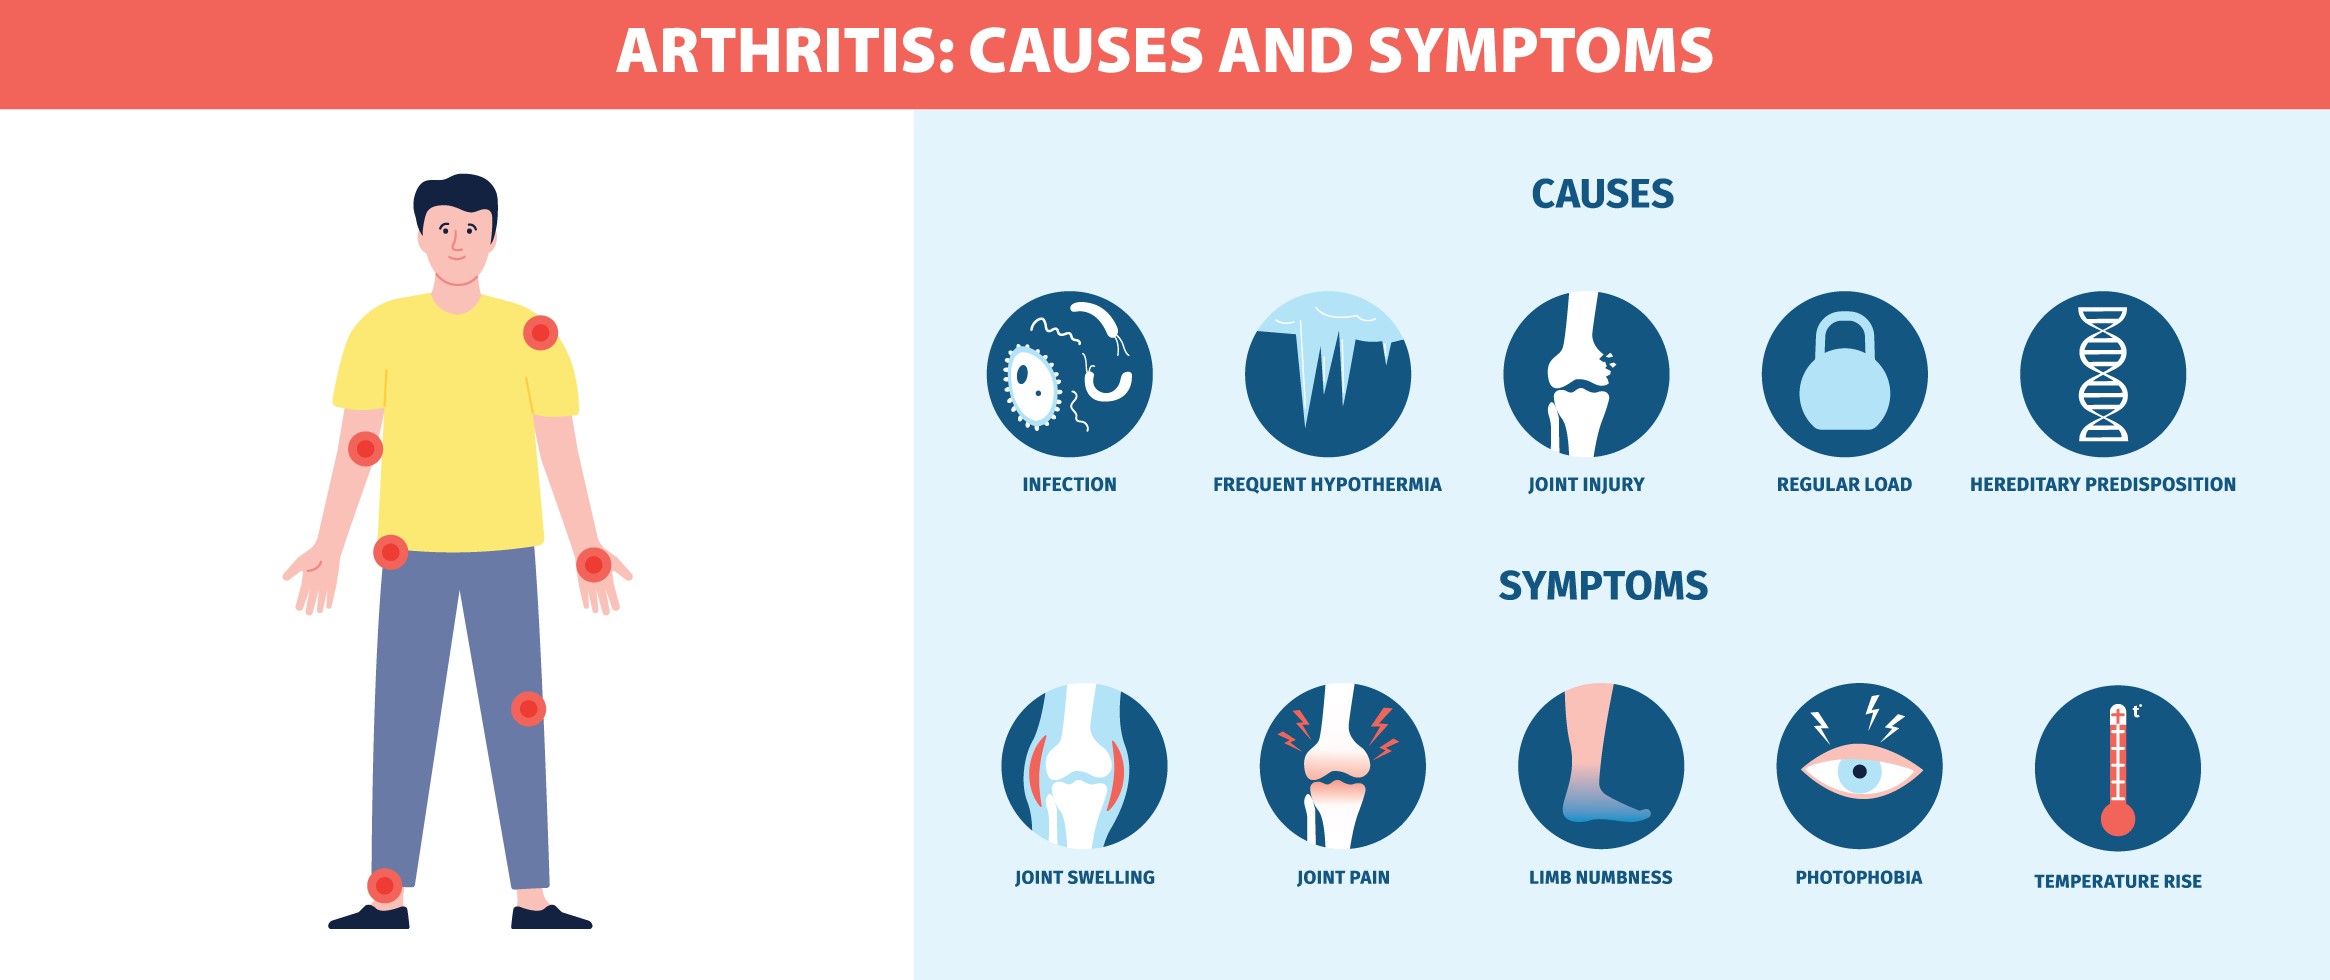 Arthritis: Understanding the Types, Symptoms, and Diagnostic Tests